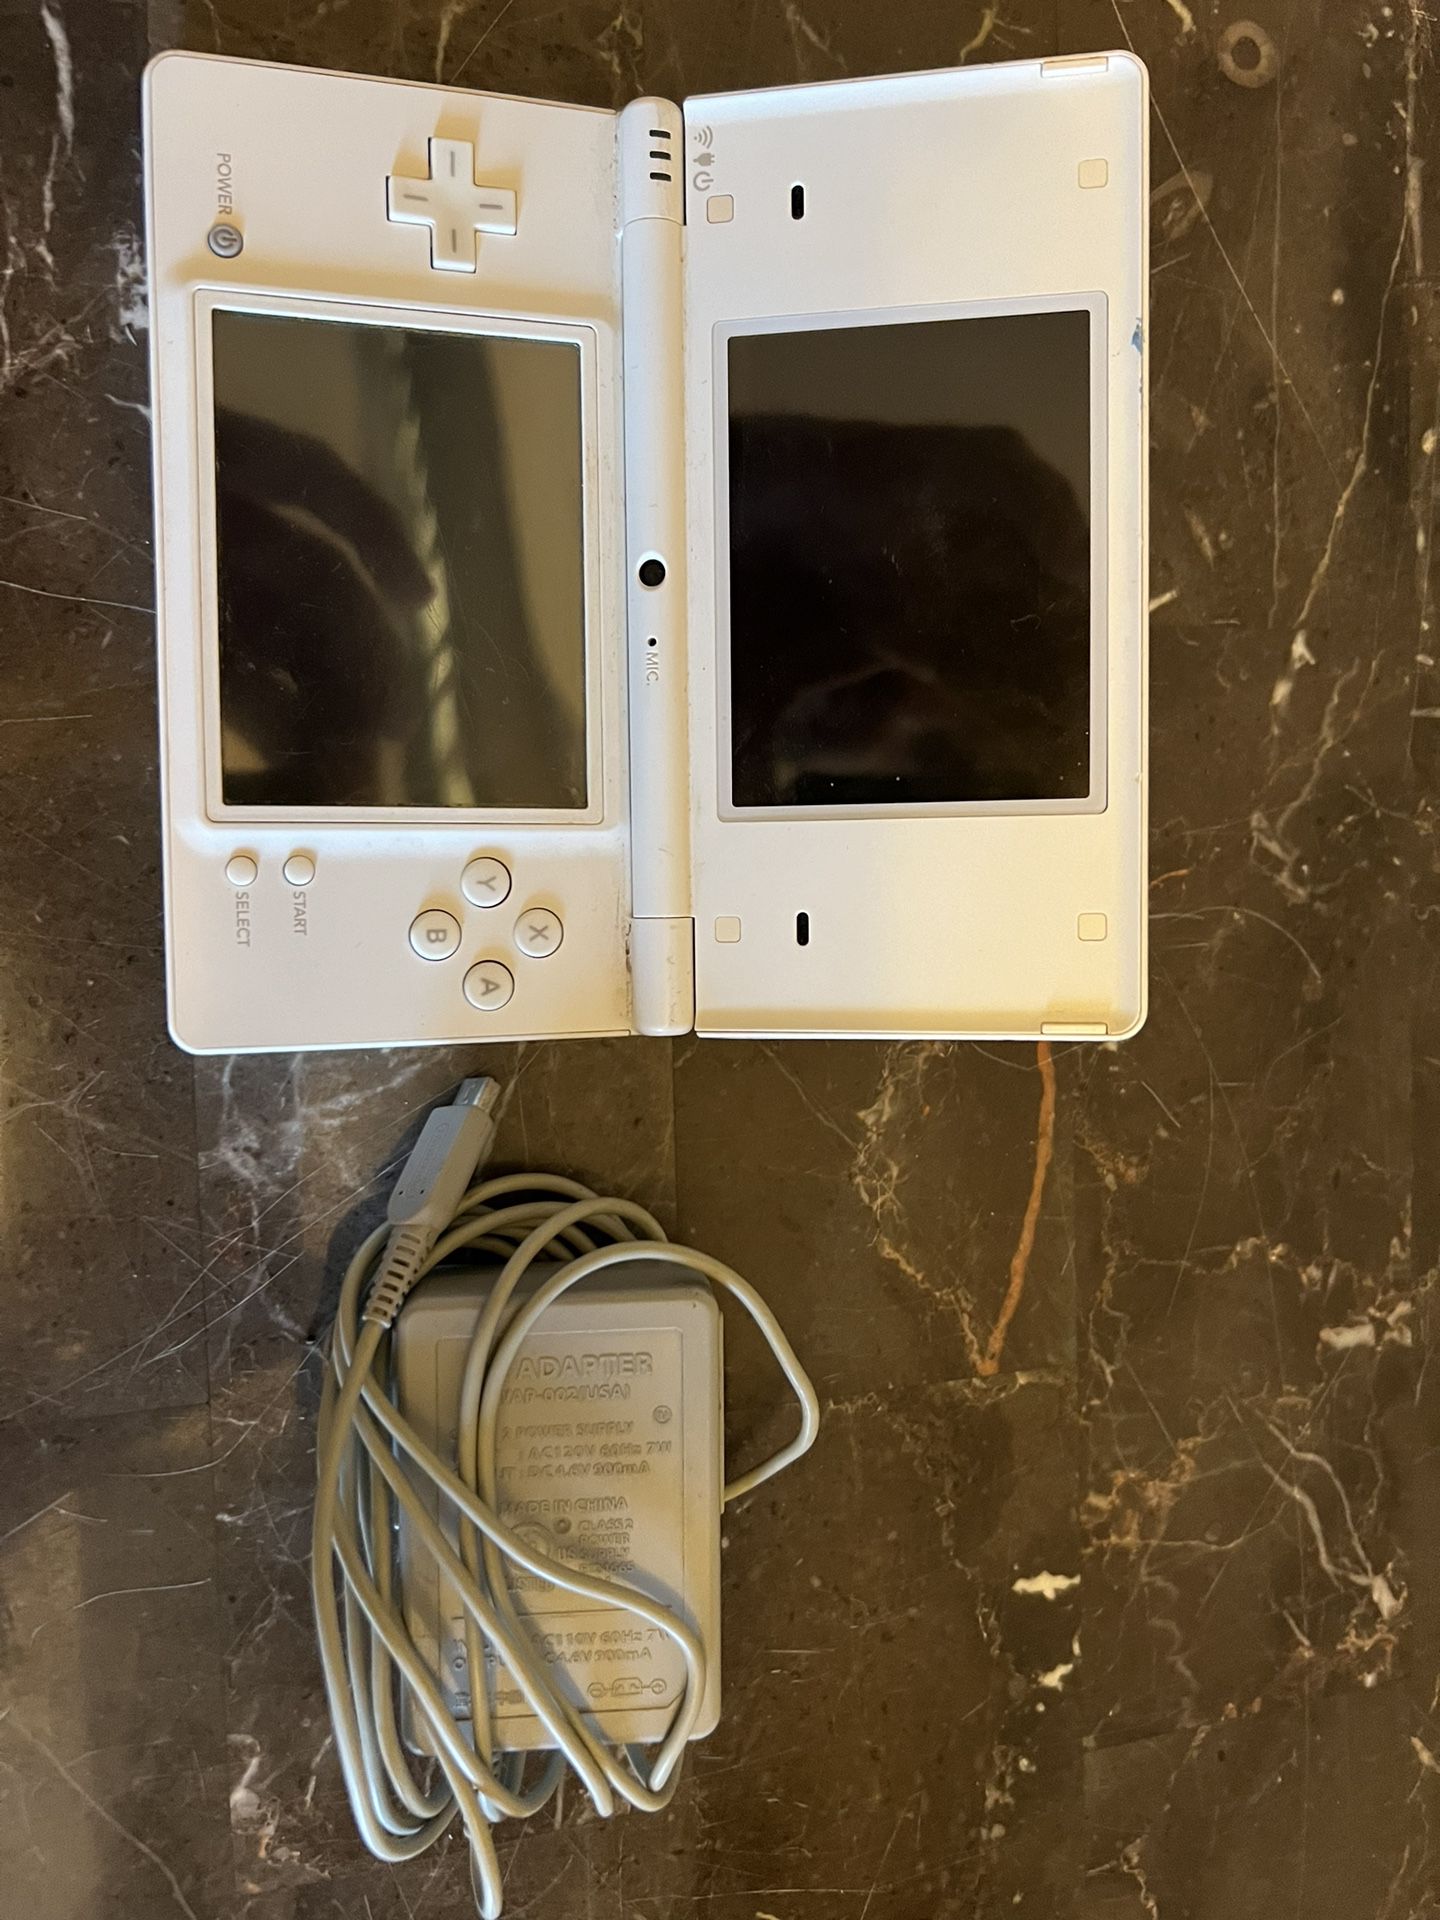 Nintendo DSI With Charger